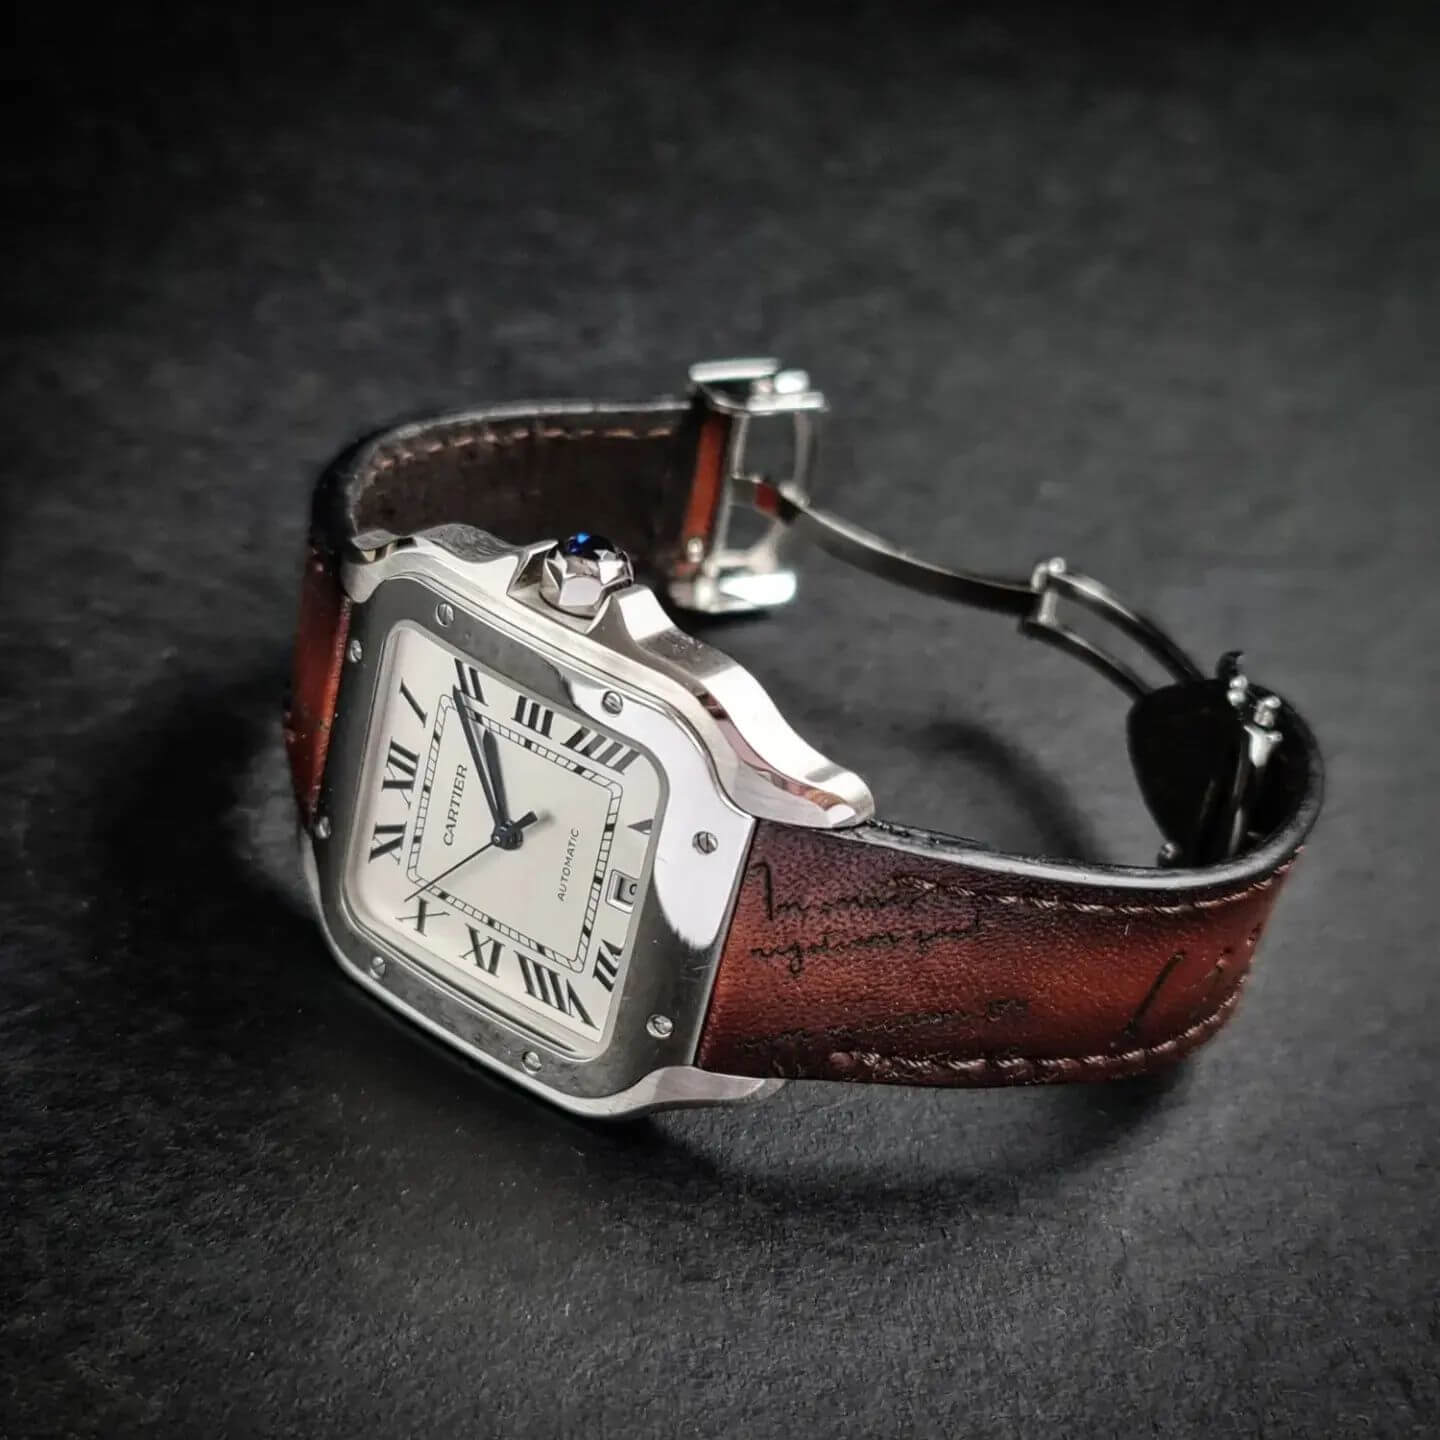 Cartier Santos on bespoke leather strap by Gunny Straps 